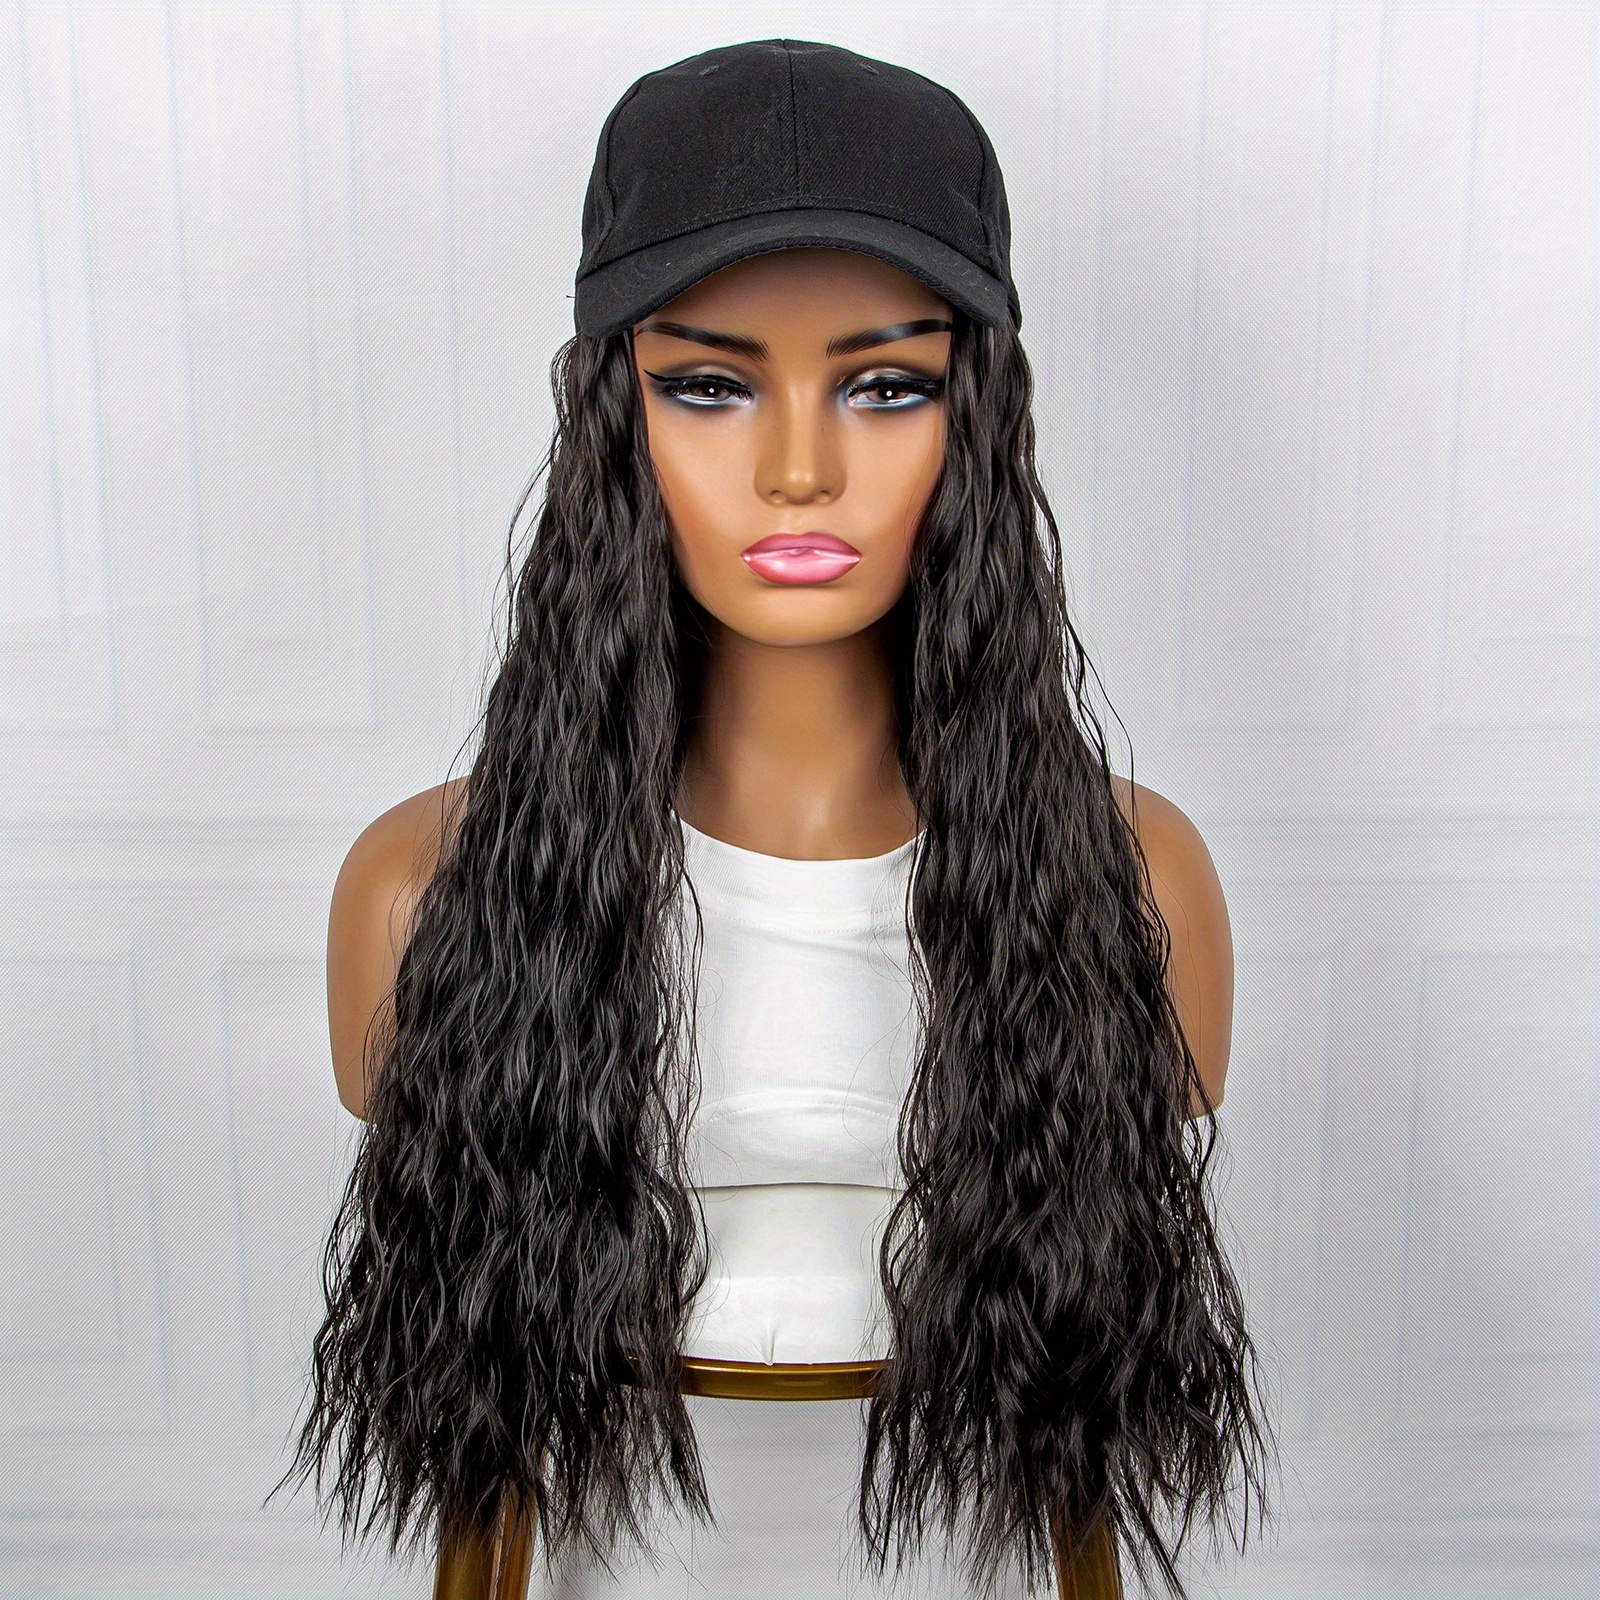 Baseball Cap Wigs Synthetic Long Wave Baseball Cap With Hair Extensions ...